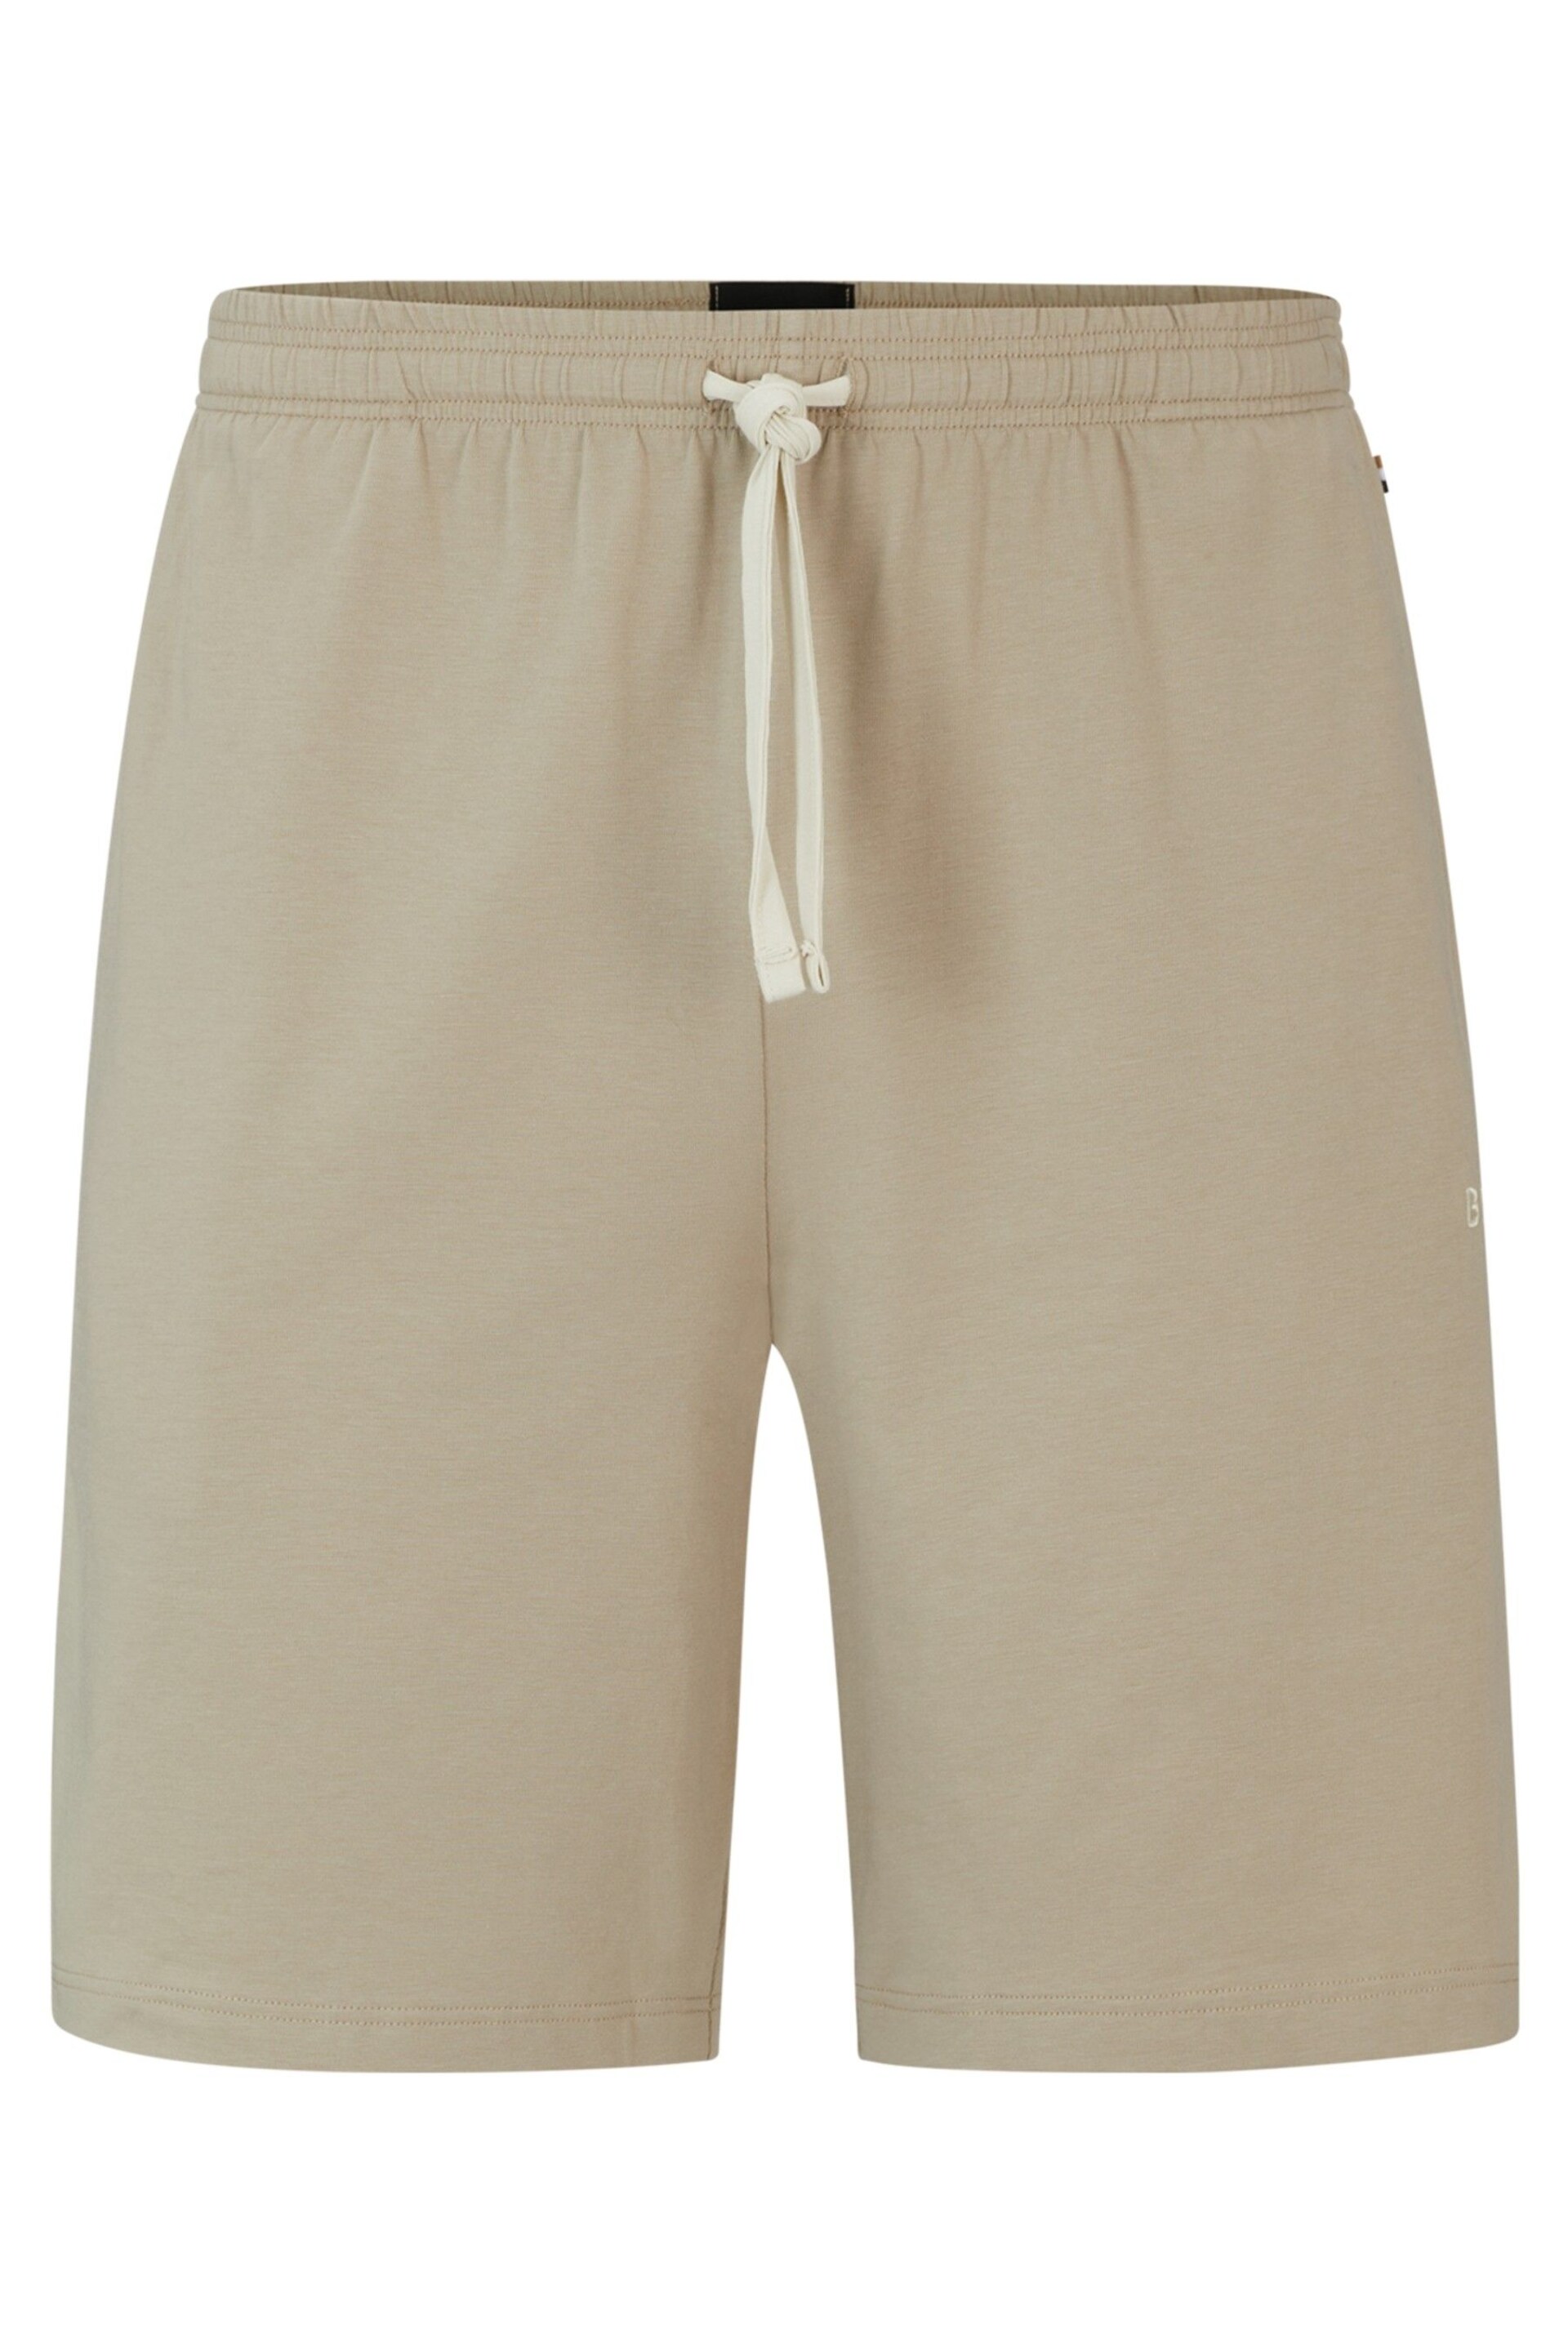 BOSS Beige Stretch Cotton Jersey Shorts - Image 5 of 5